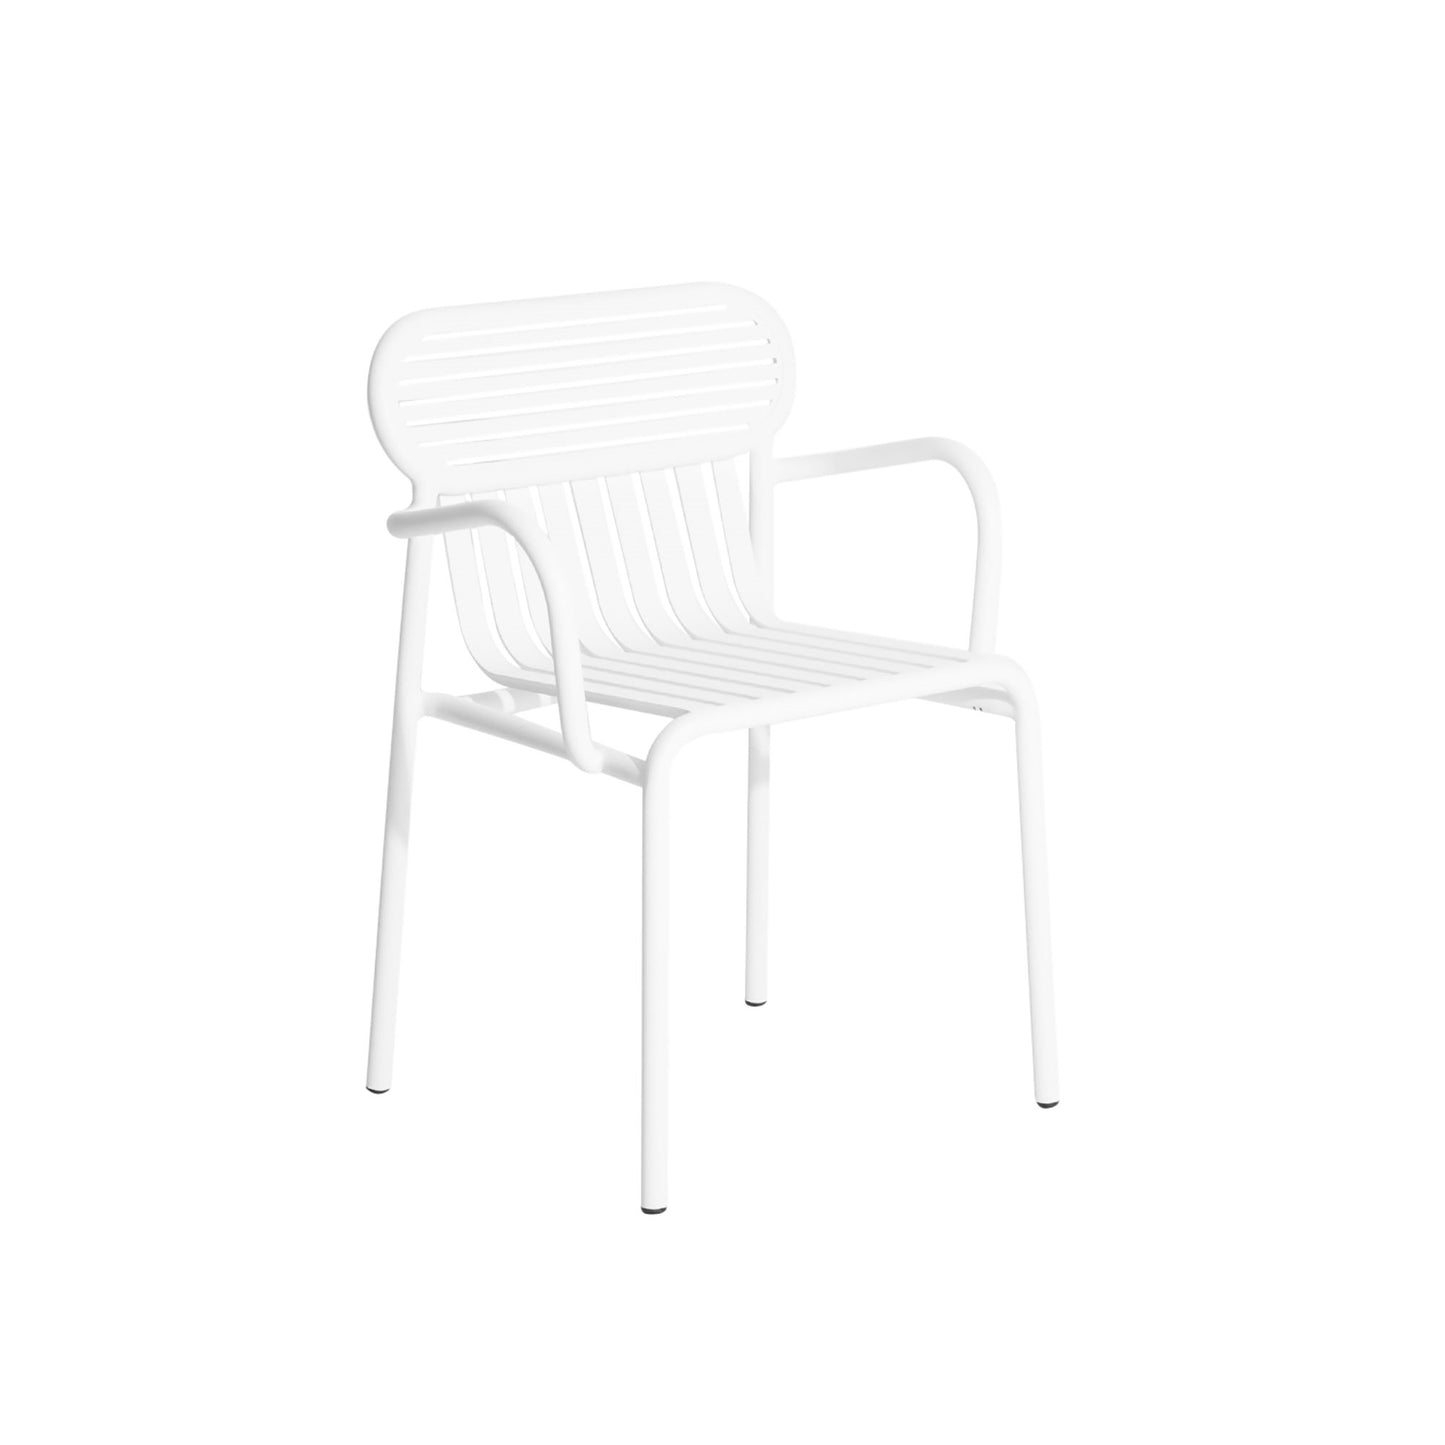 WEEK-END Dining Chair with Armrests by Petite Friture #White